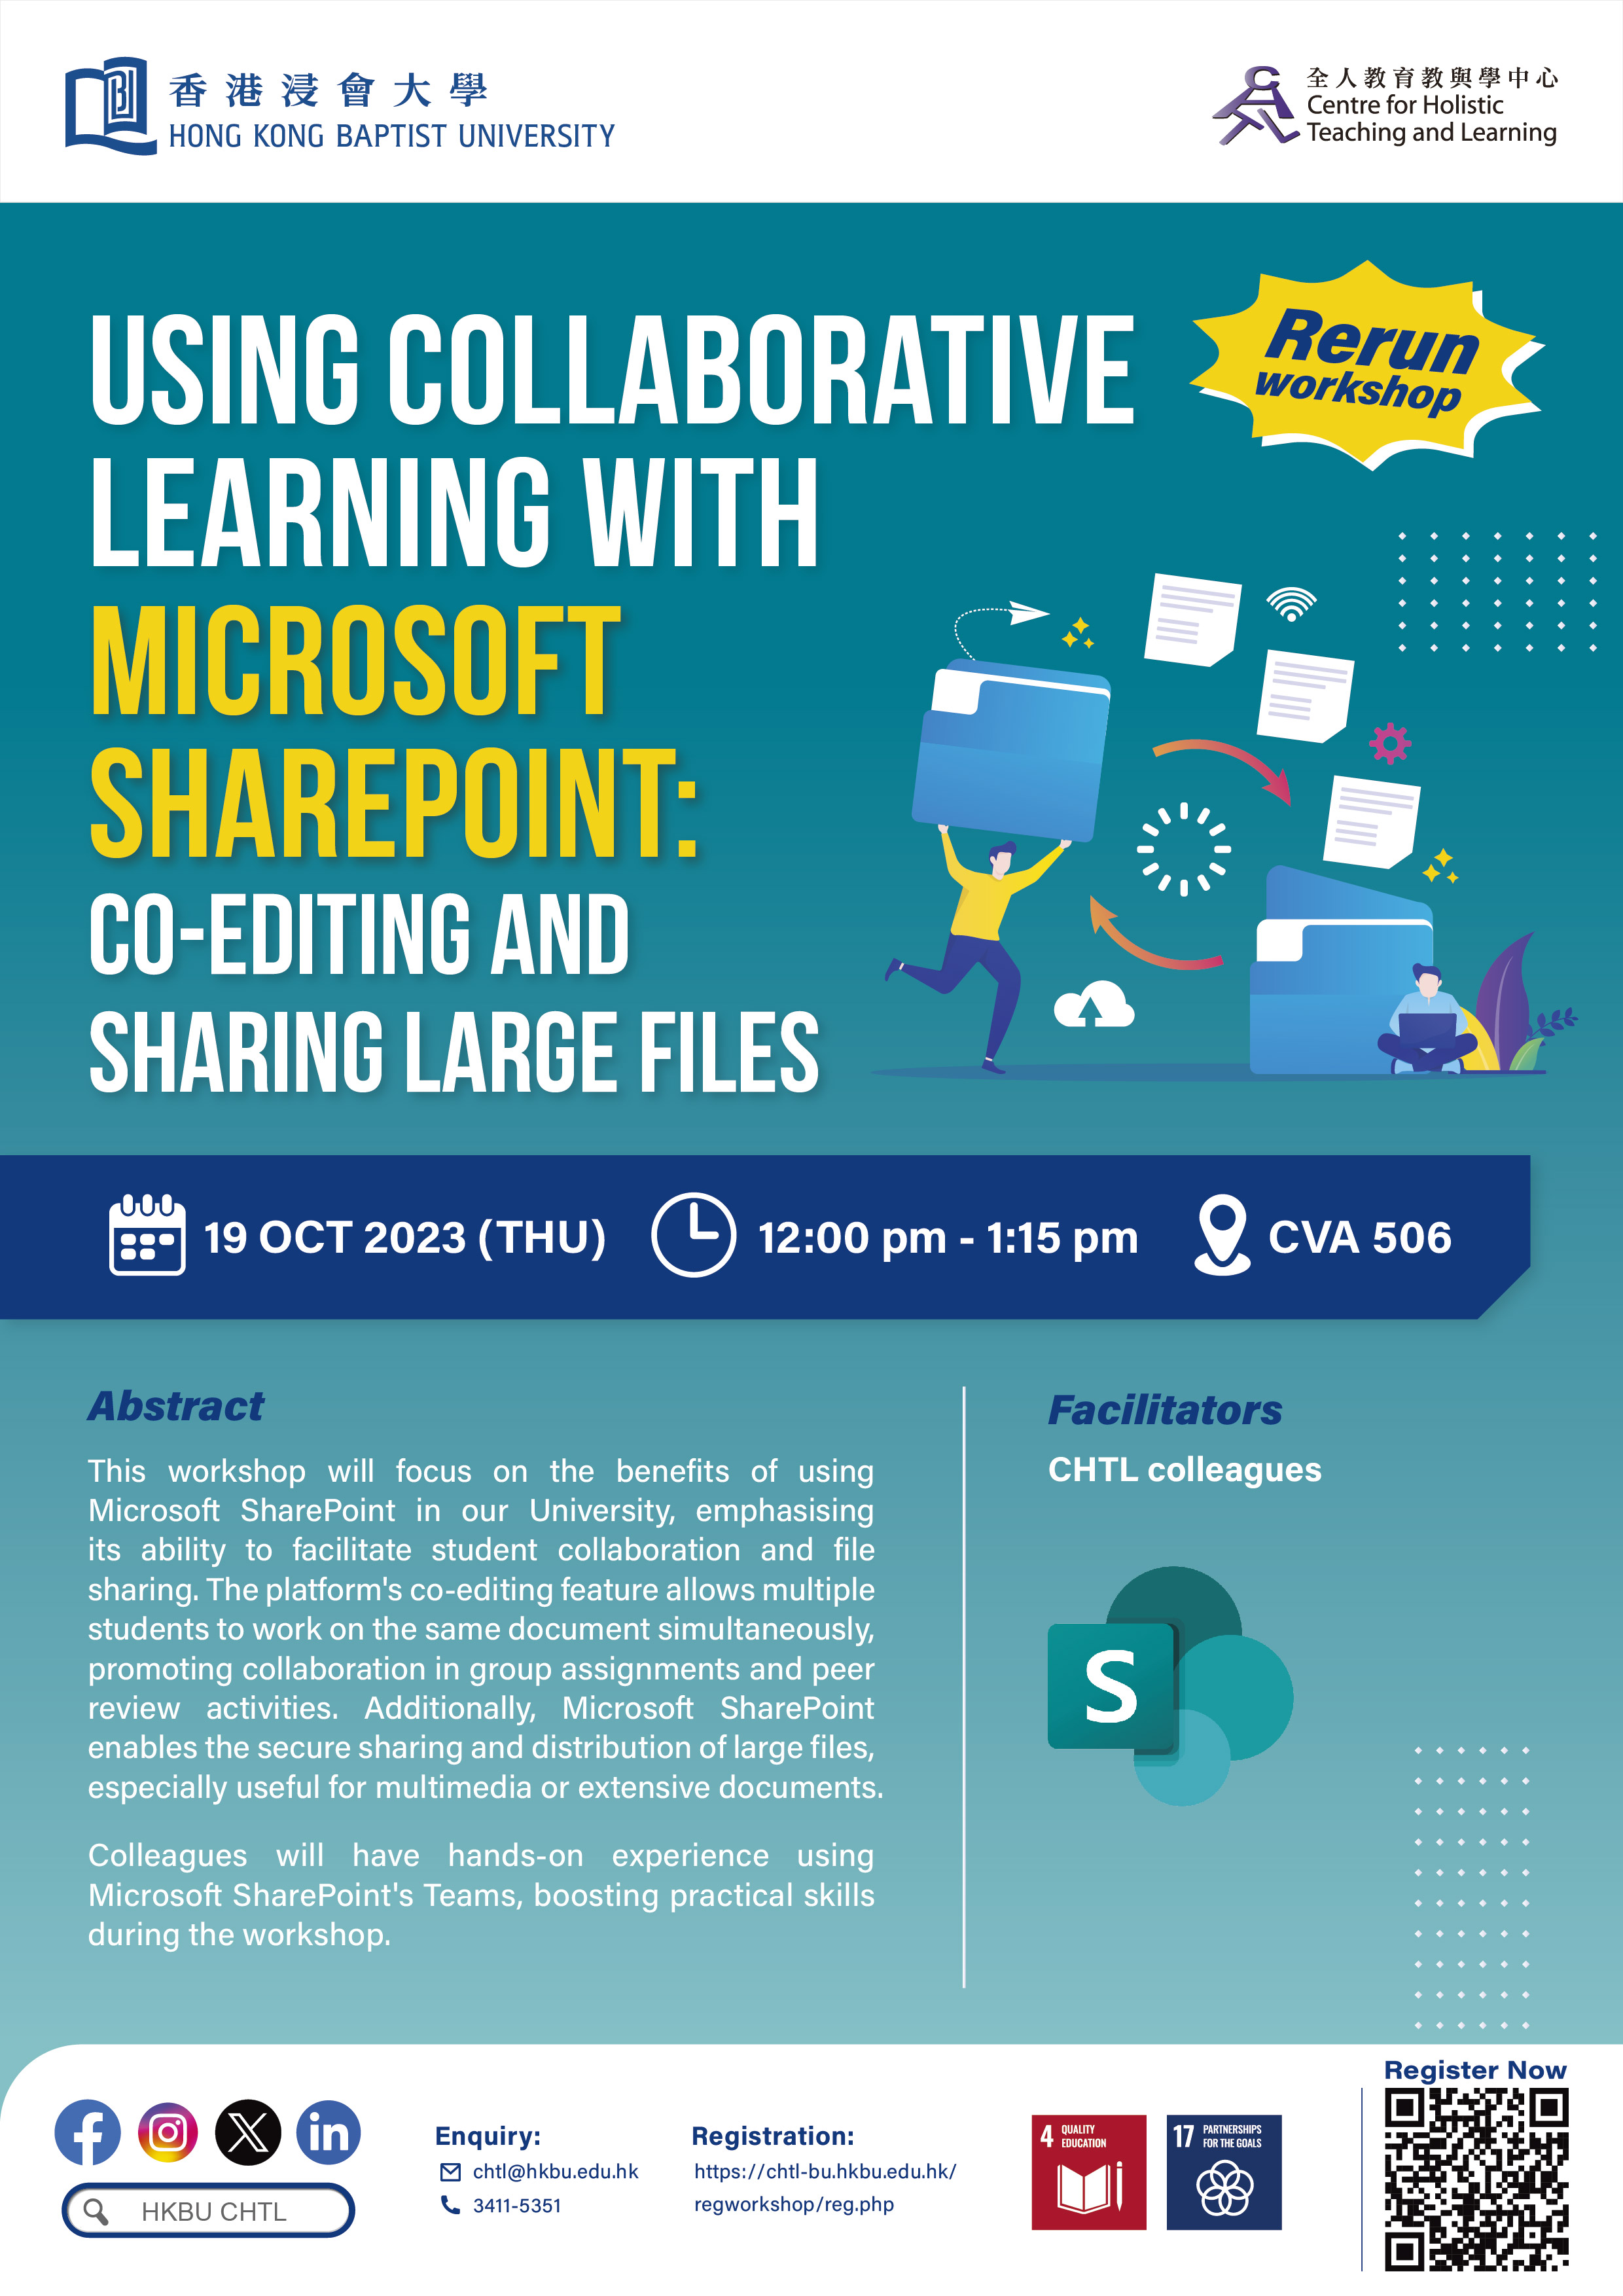 Using Collaborative Learning with Microsoft SharePoint: Co-Editing and Sharing Large Files